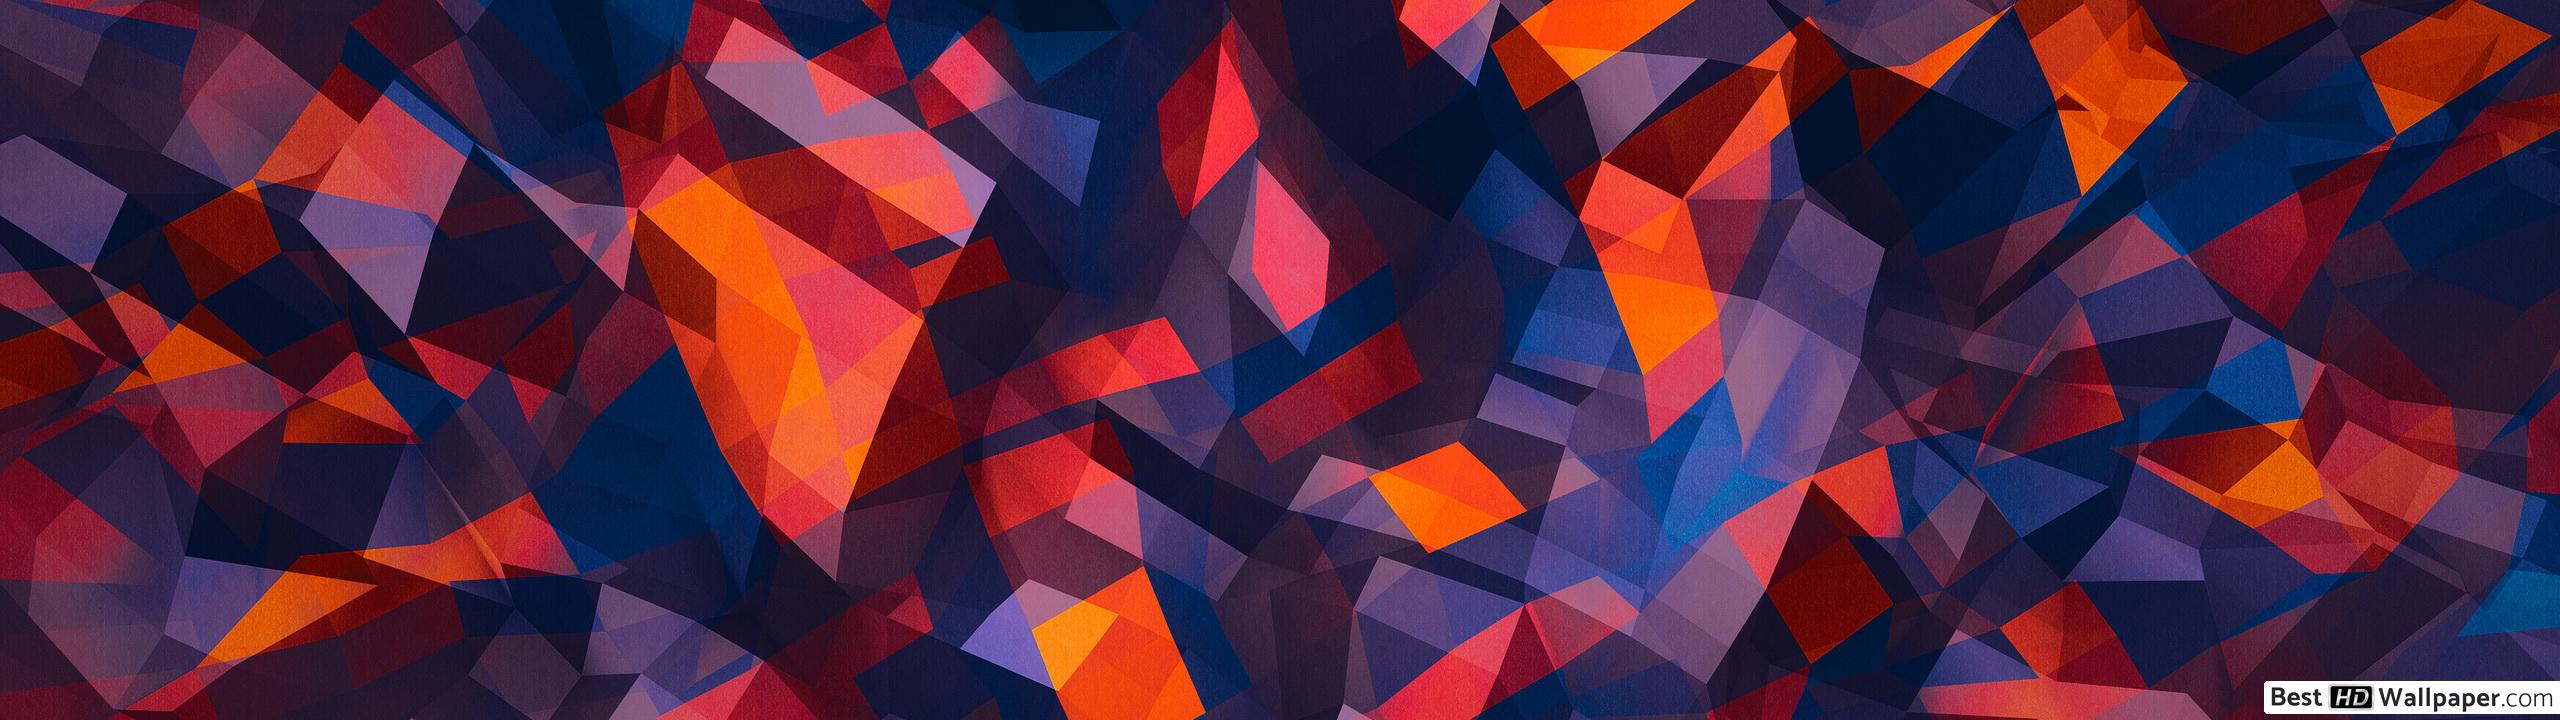 Colorful geometric shapes background HD wallpaper download